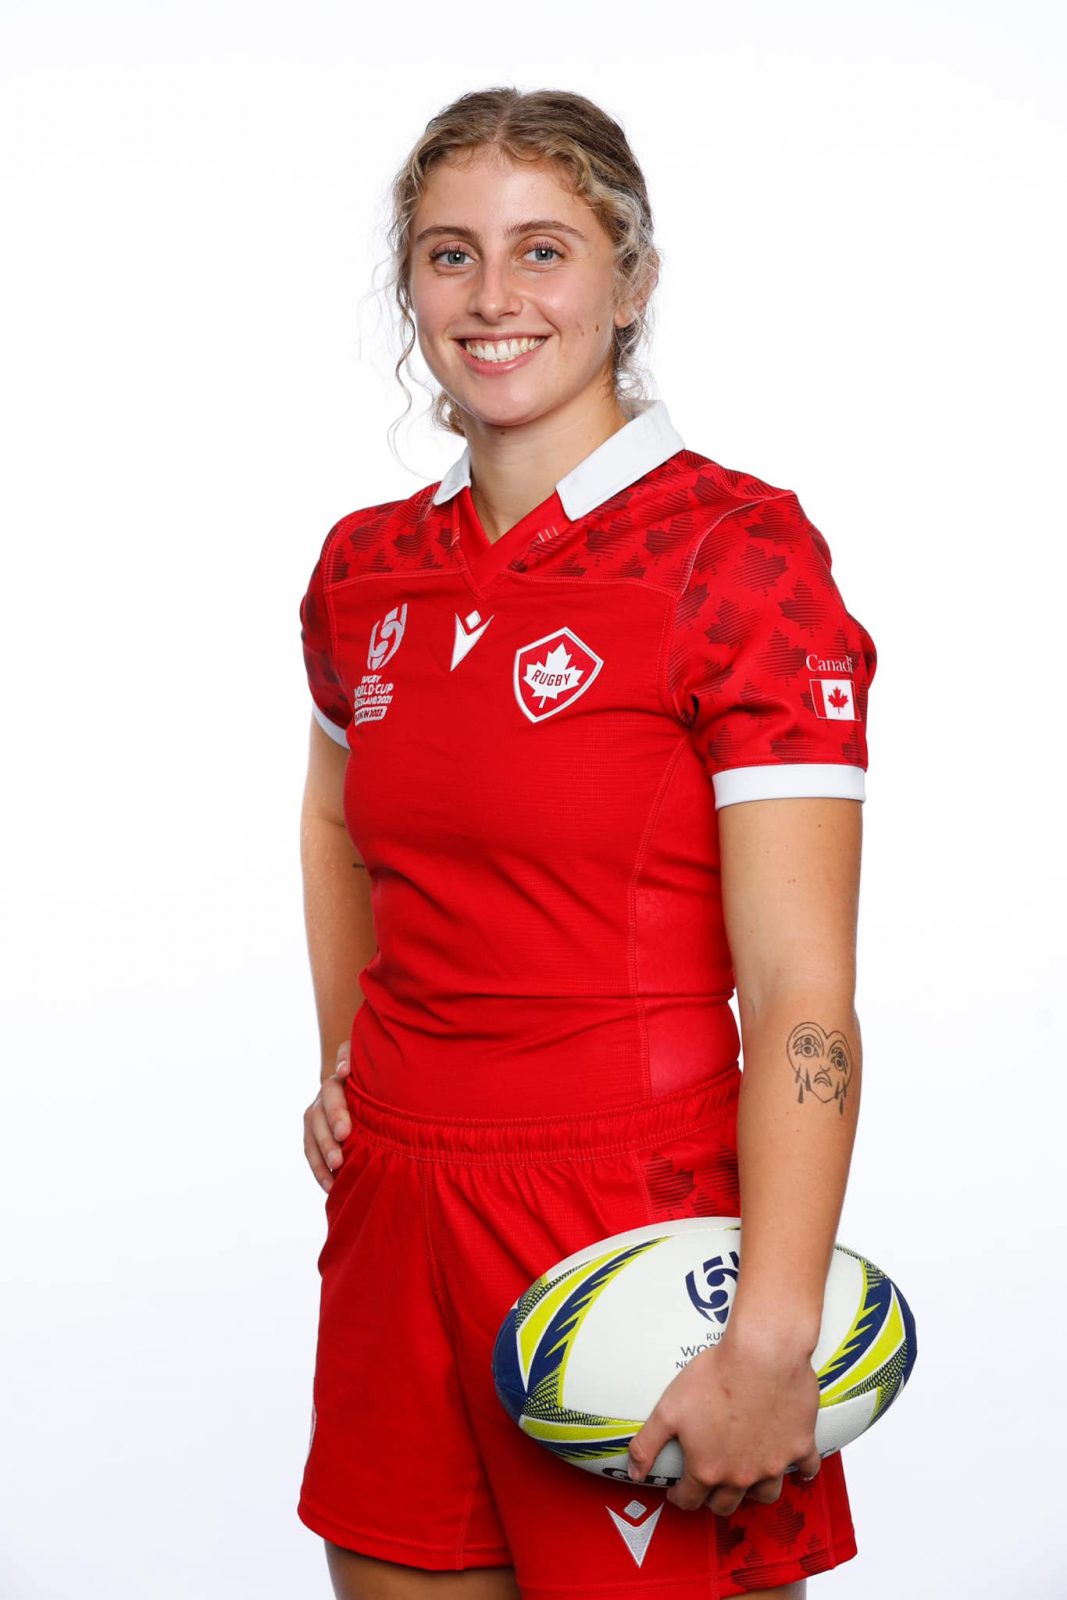 Cornwall-Born Madison Grant Heads to New Zealand for Rugby World Cup